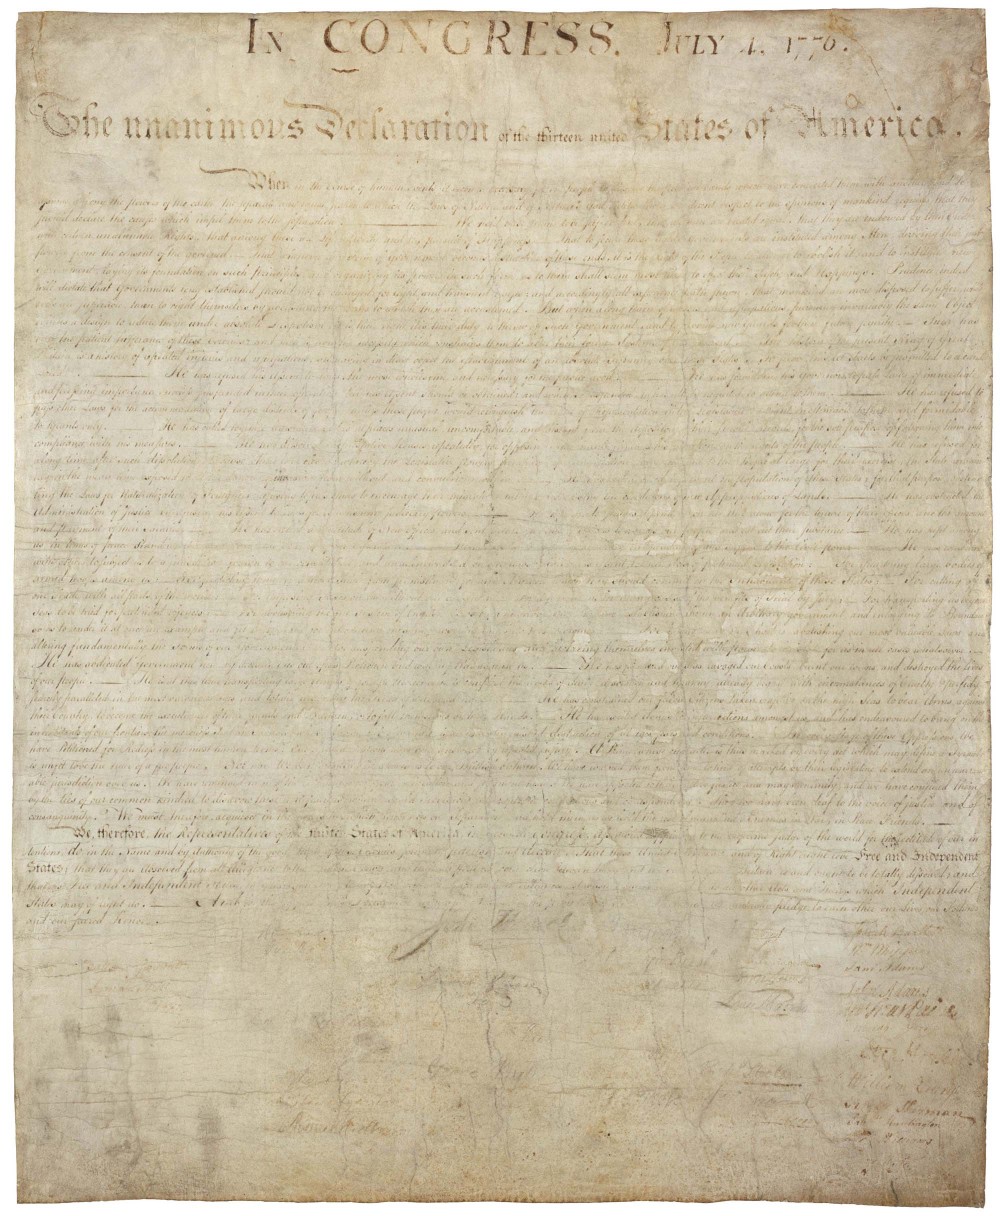 The Declaration of Independence, National Archives and Records Administration.